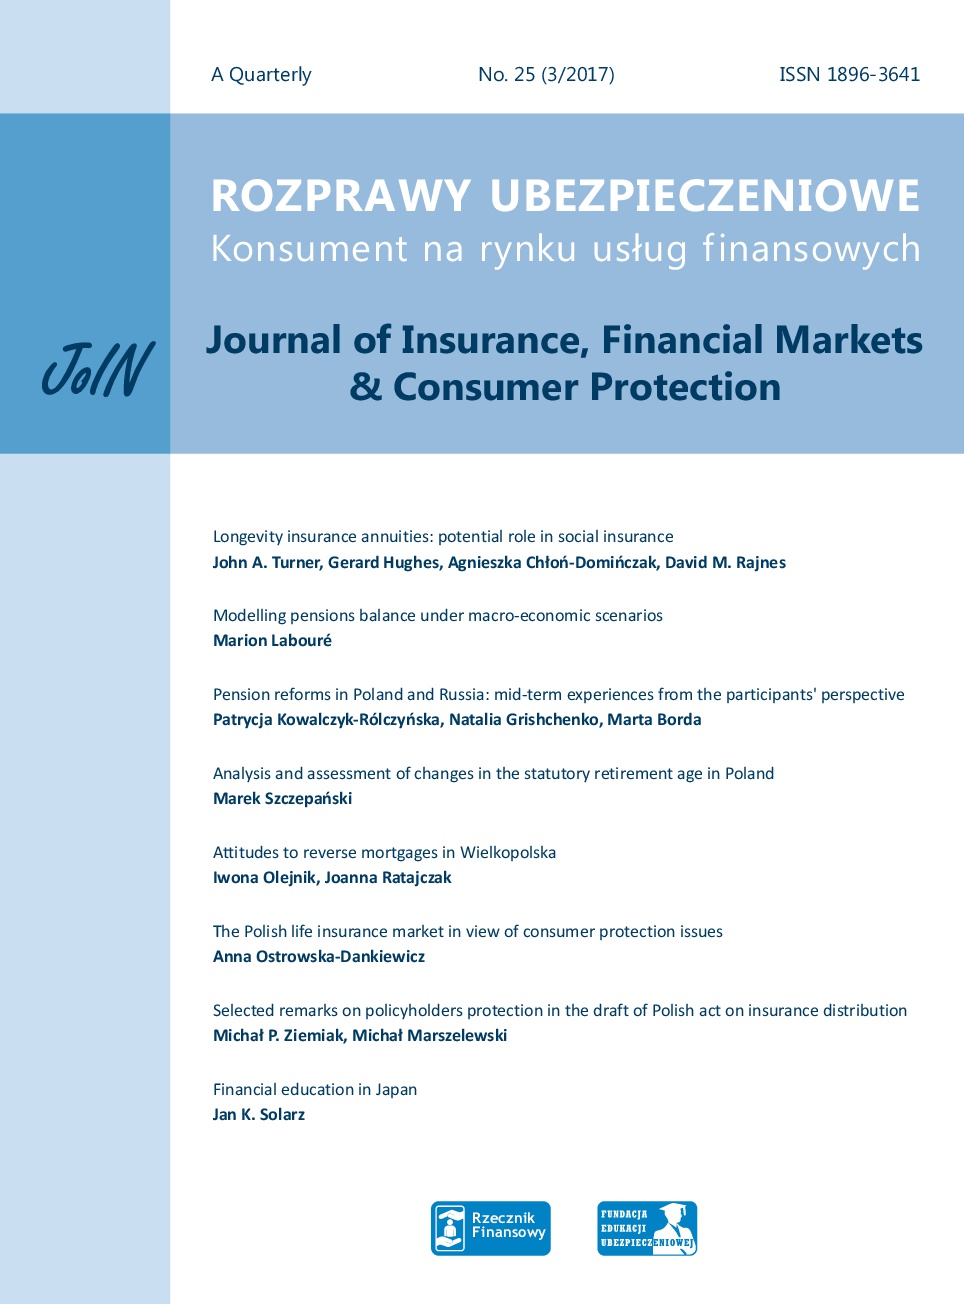 Attitudes to reverse mortgages in Wielkopolska Cover Image